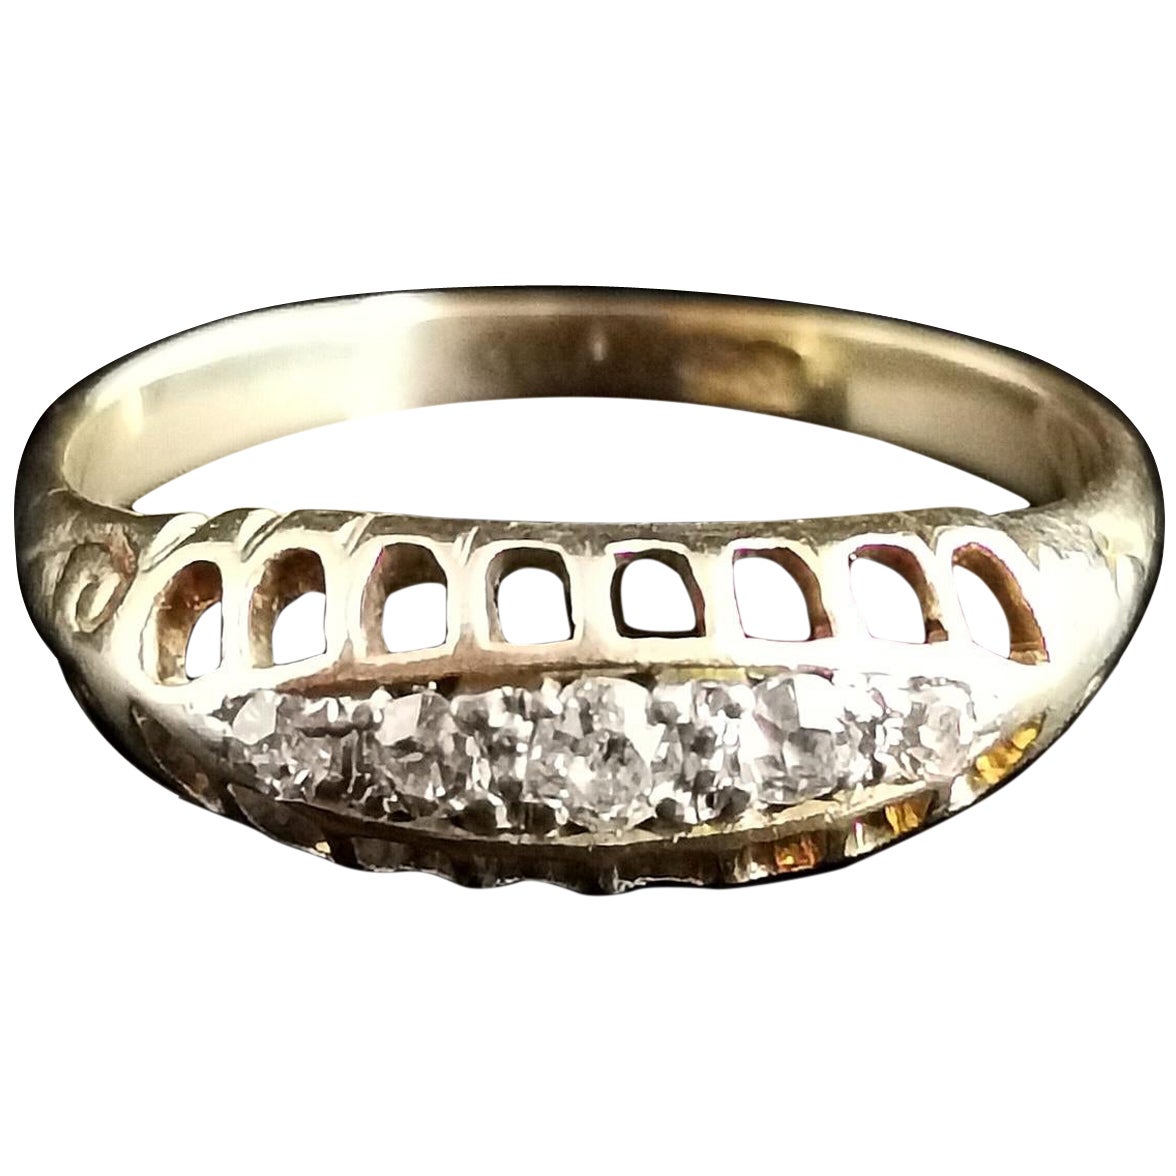 A beautiful antique five stone diamond ring.

It is a boat head style ring claw set with six individual old cut diamonds which graduate in size, the centre stone being the largest.

It has a rich smooth 18 karat yellow gold band.

The shoulders are